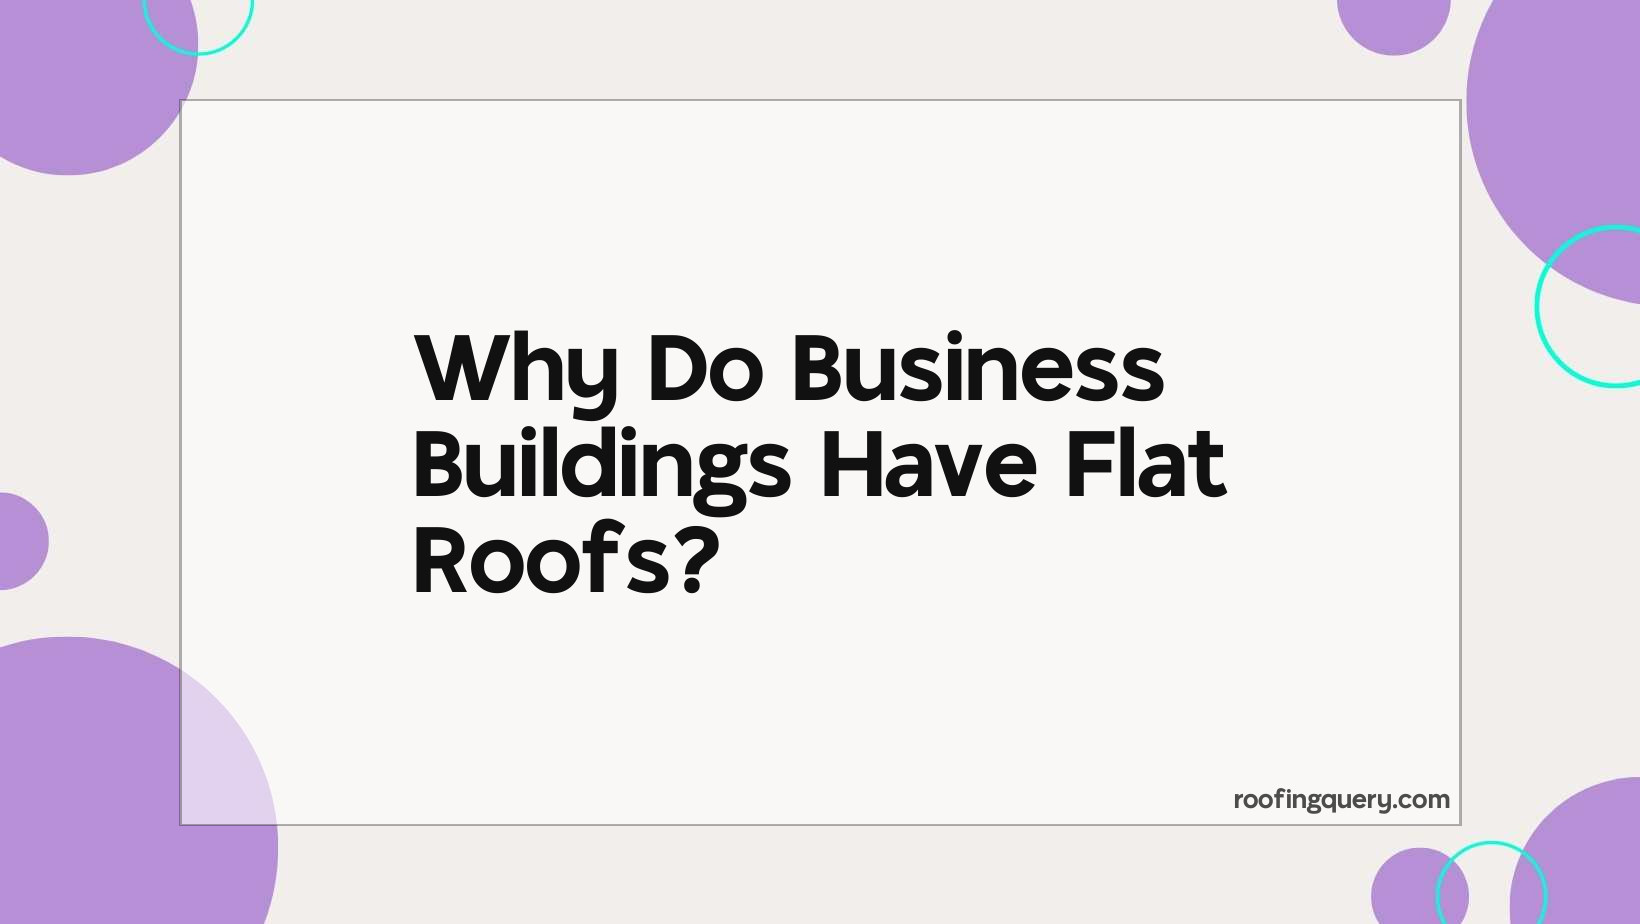 Why Do Business Buildings Have Flat Roofs?